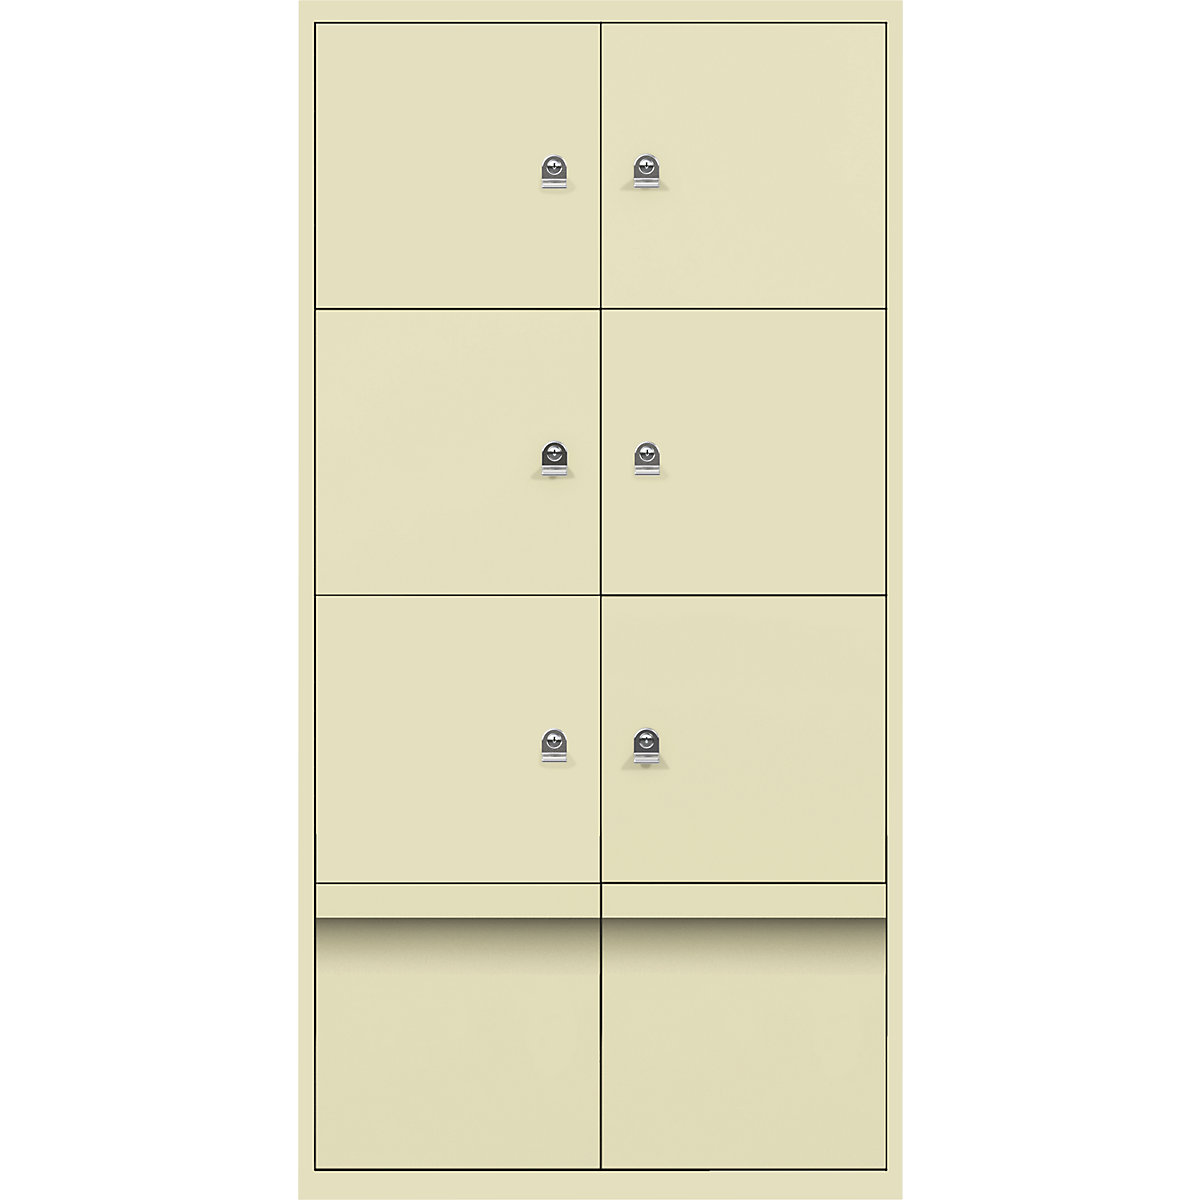 BISLEY – LateralFile™ lodge, with 6 lockable compartments and 2 drawers, height 375 mm each, cream